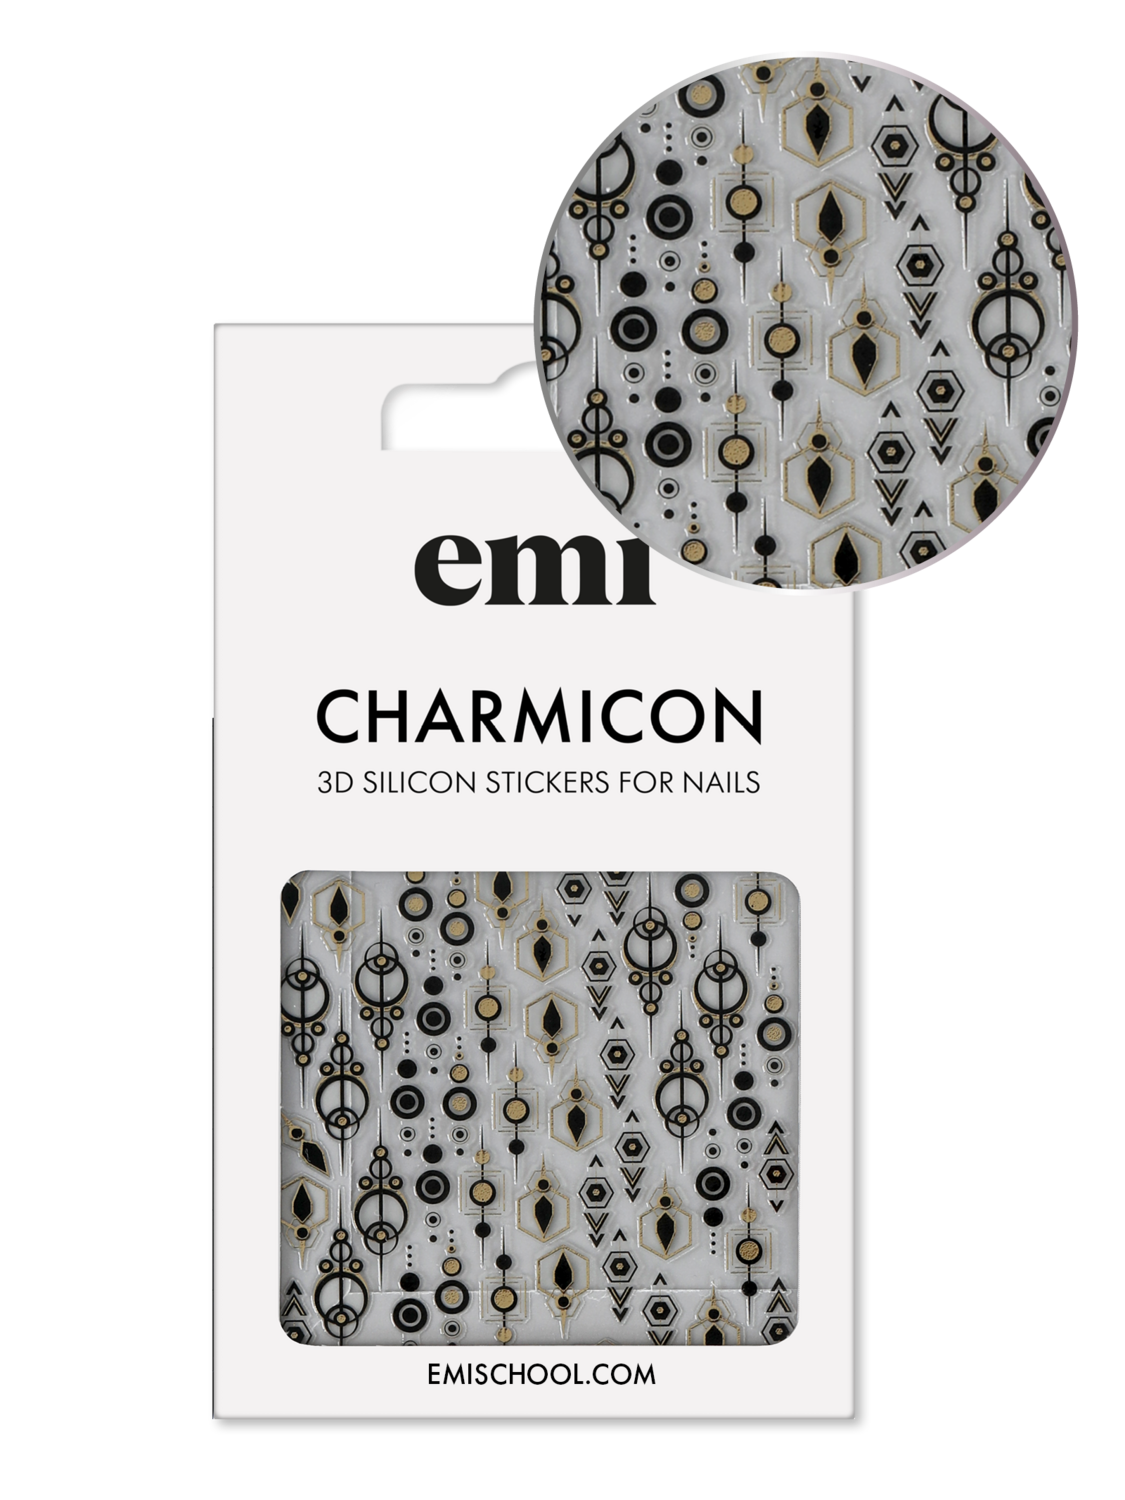 Charmicon 3D Silicone Stickers #214 Fancy Patterns